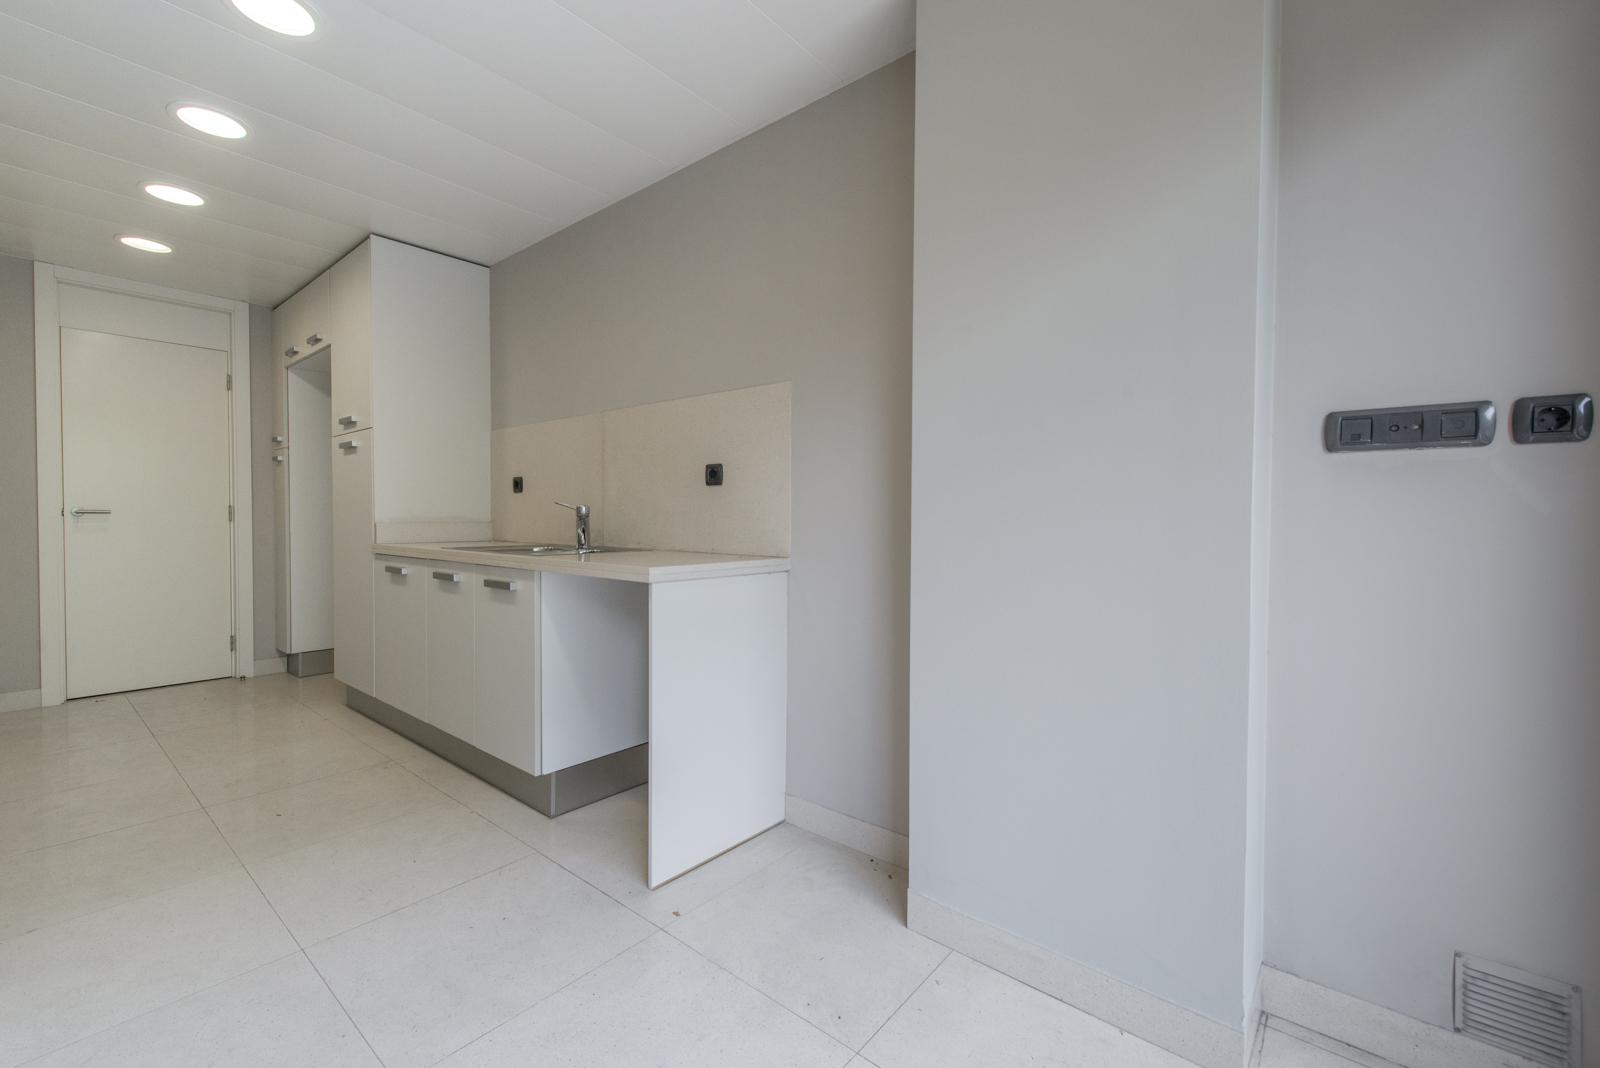 151215 Flat for sale in Gràcia, Vallcarca and les Penitents 8